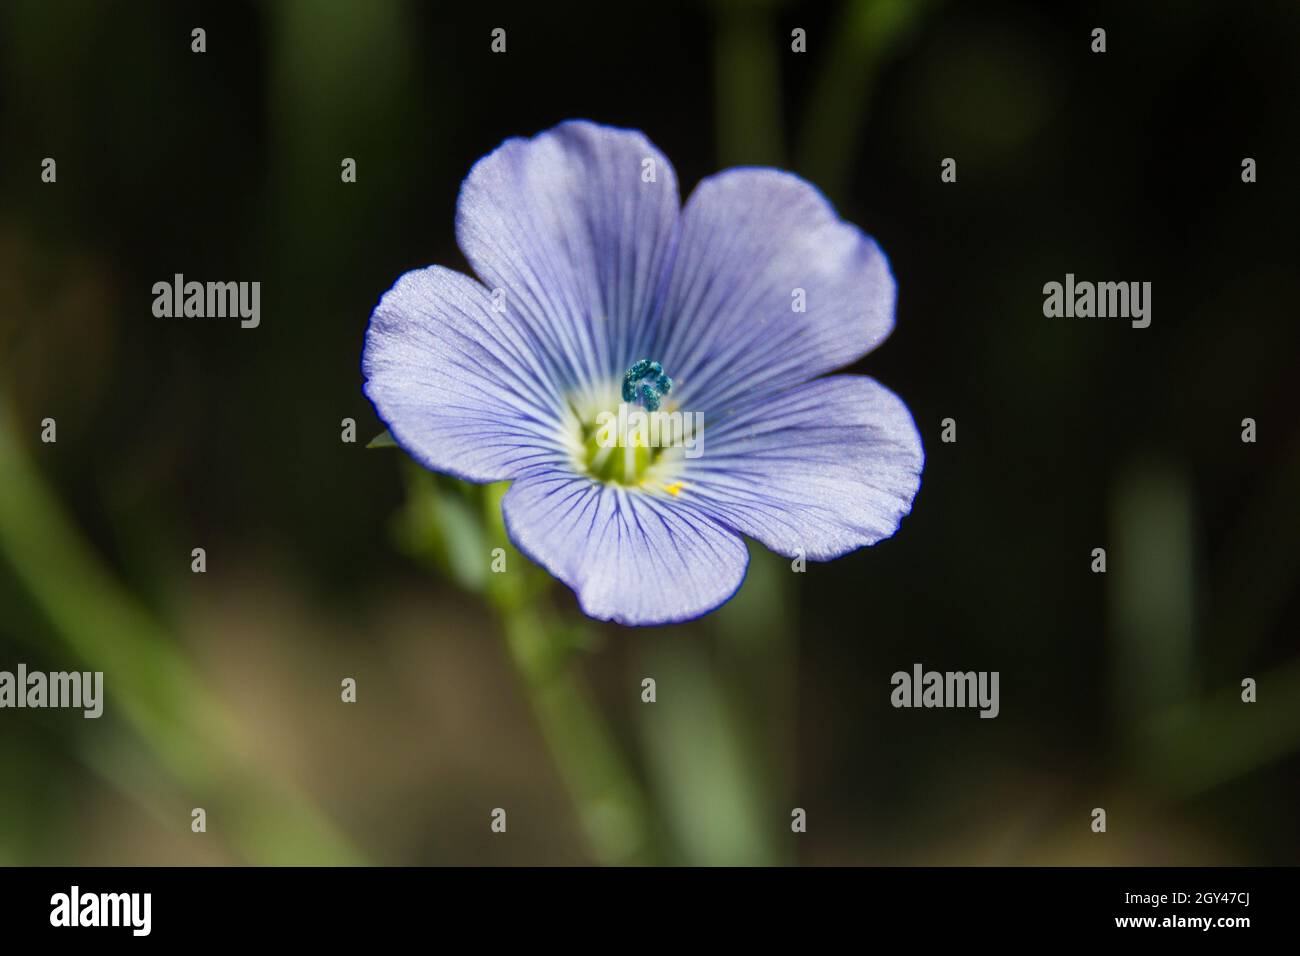 detail of the flax flower in the garden Stock Photo